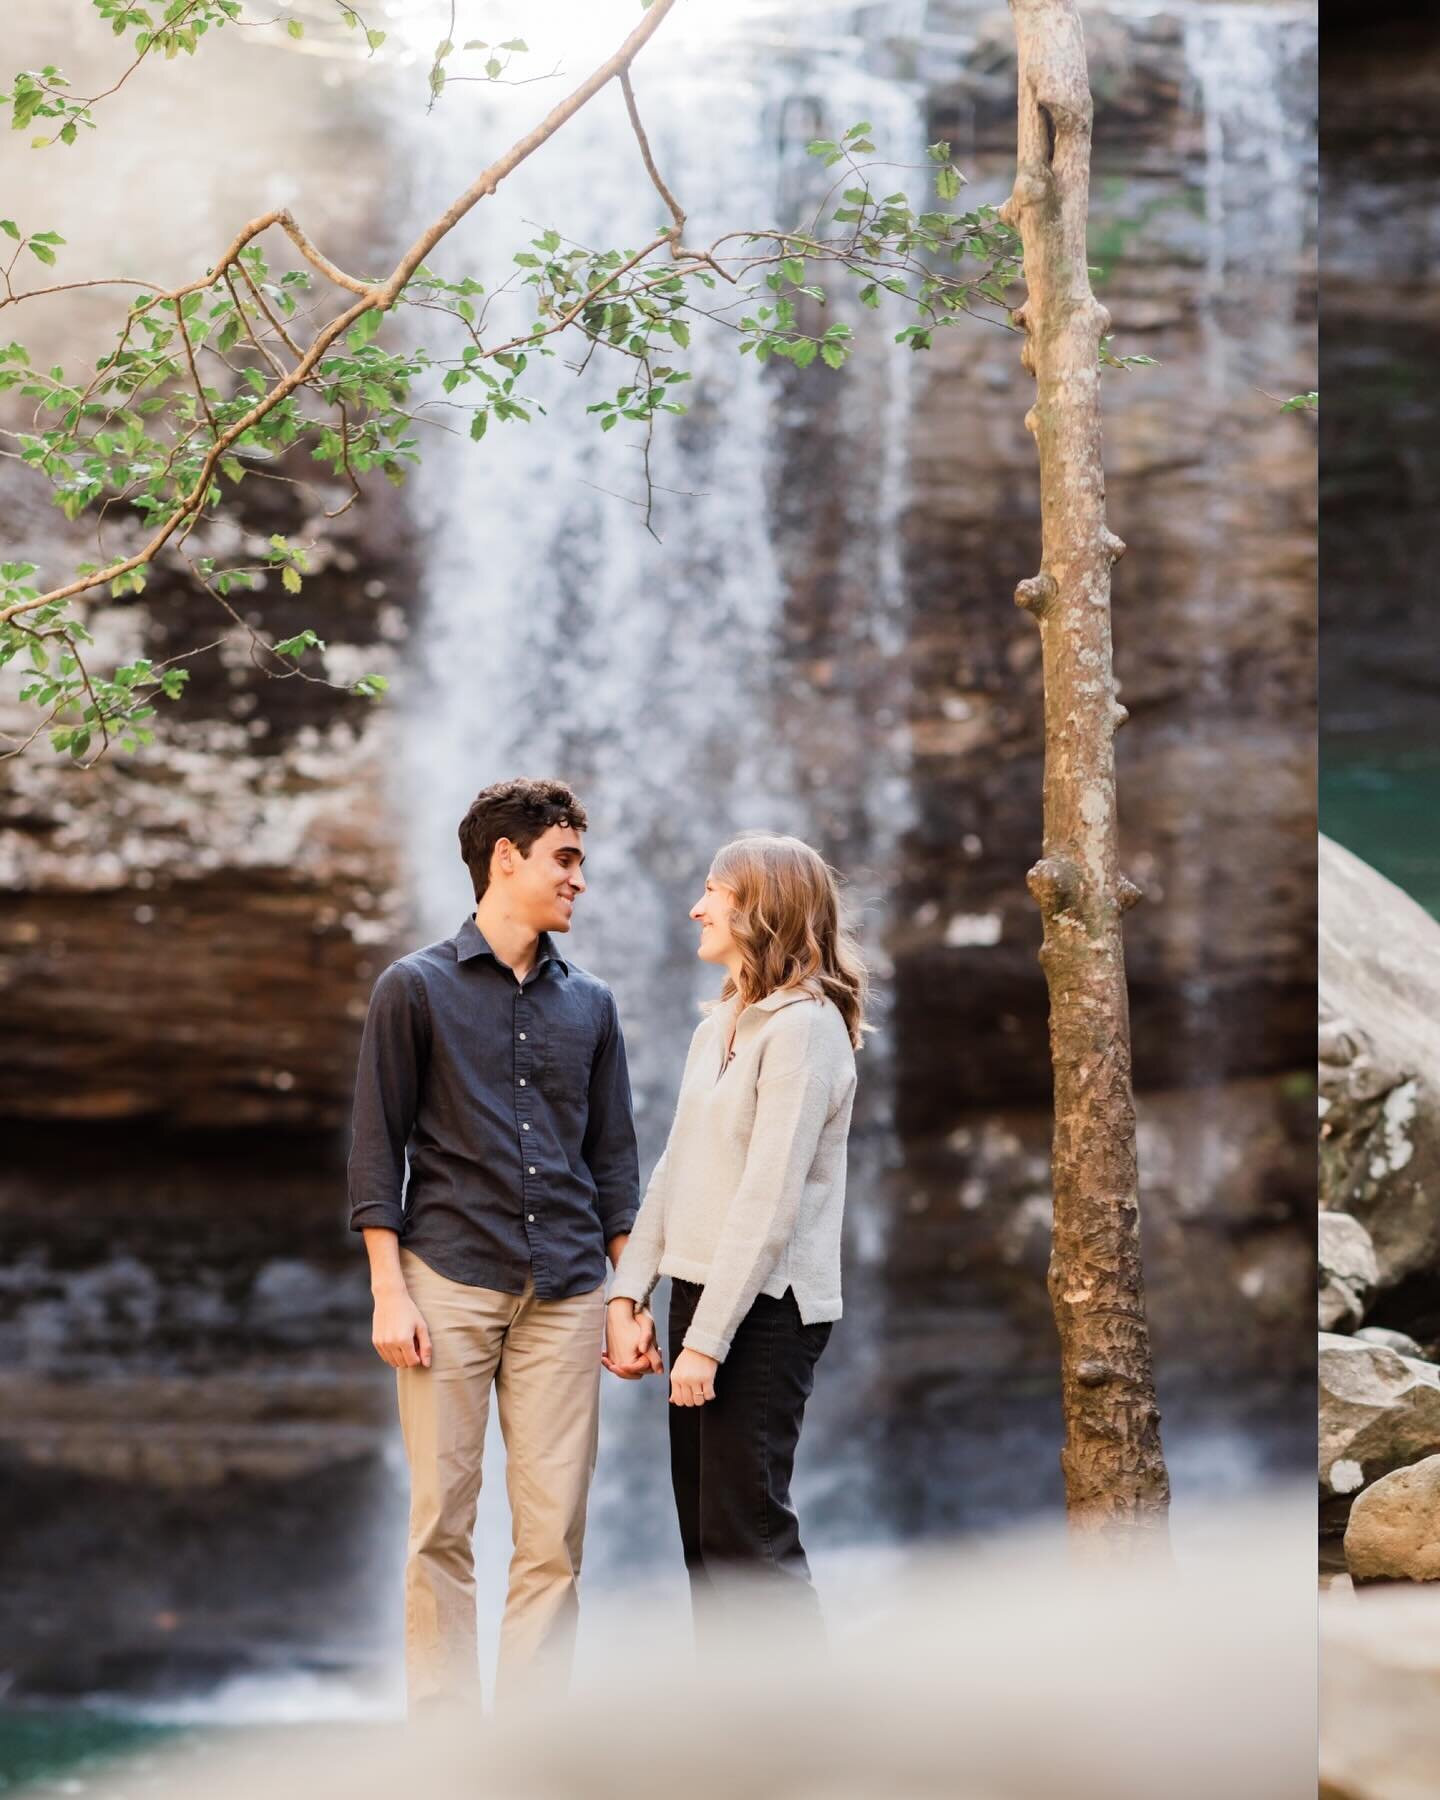 Ashlyn + Philip&rsquo;s engagement session was magical! 😍